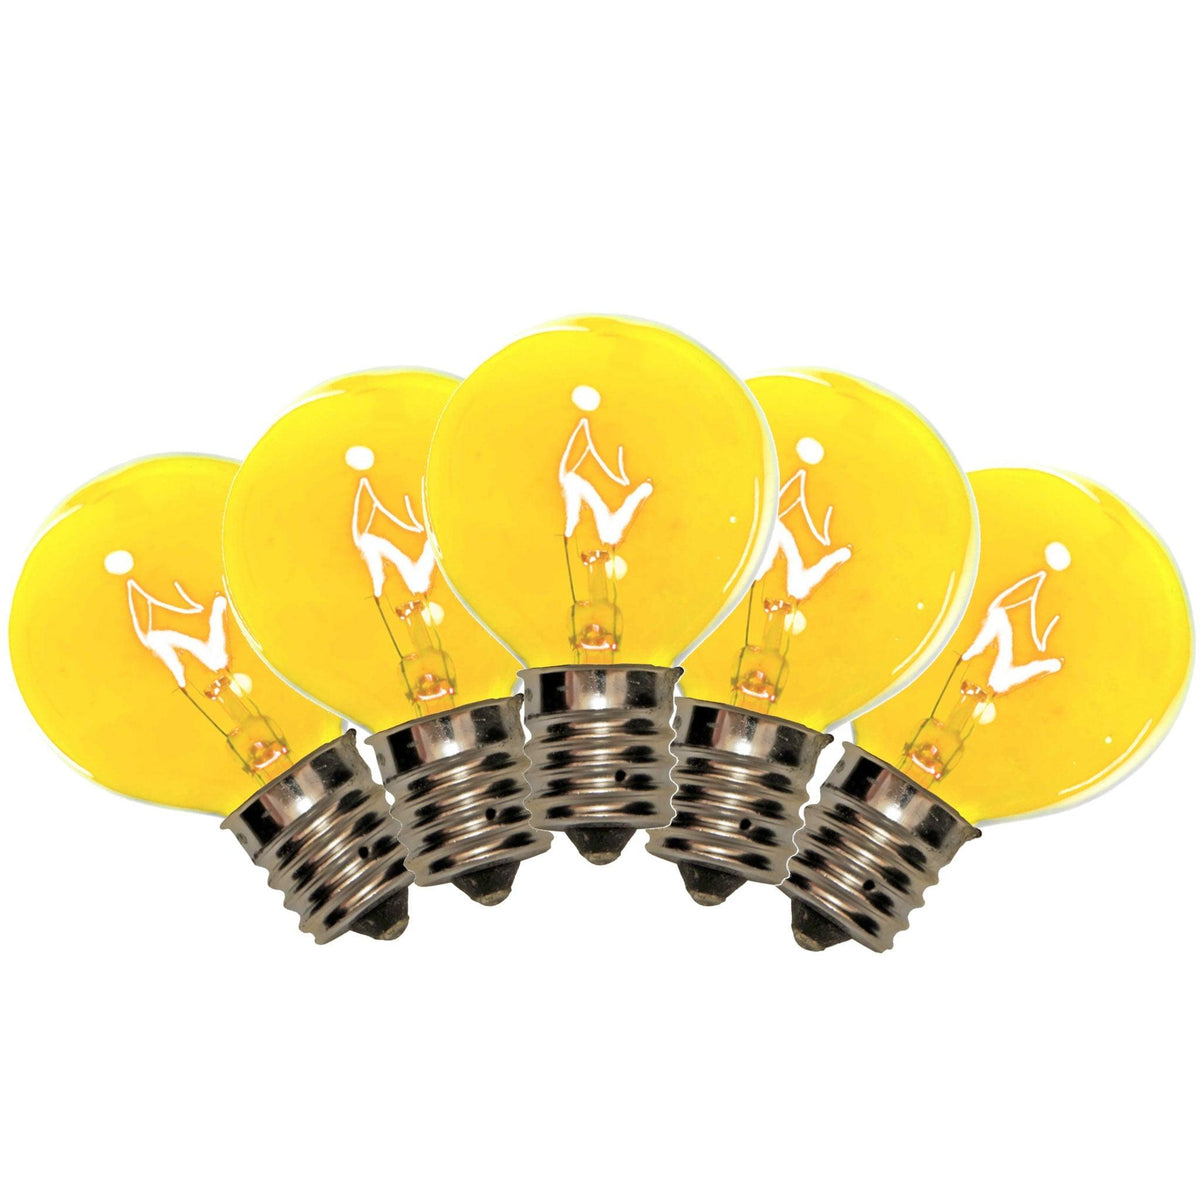 1 Box of 25 of brand new transparent Yellow G40 Globe Light Bulbs Replace your old bulbs today at leedisplay.com